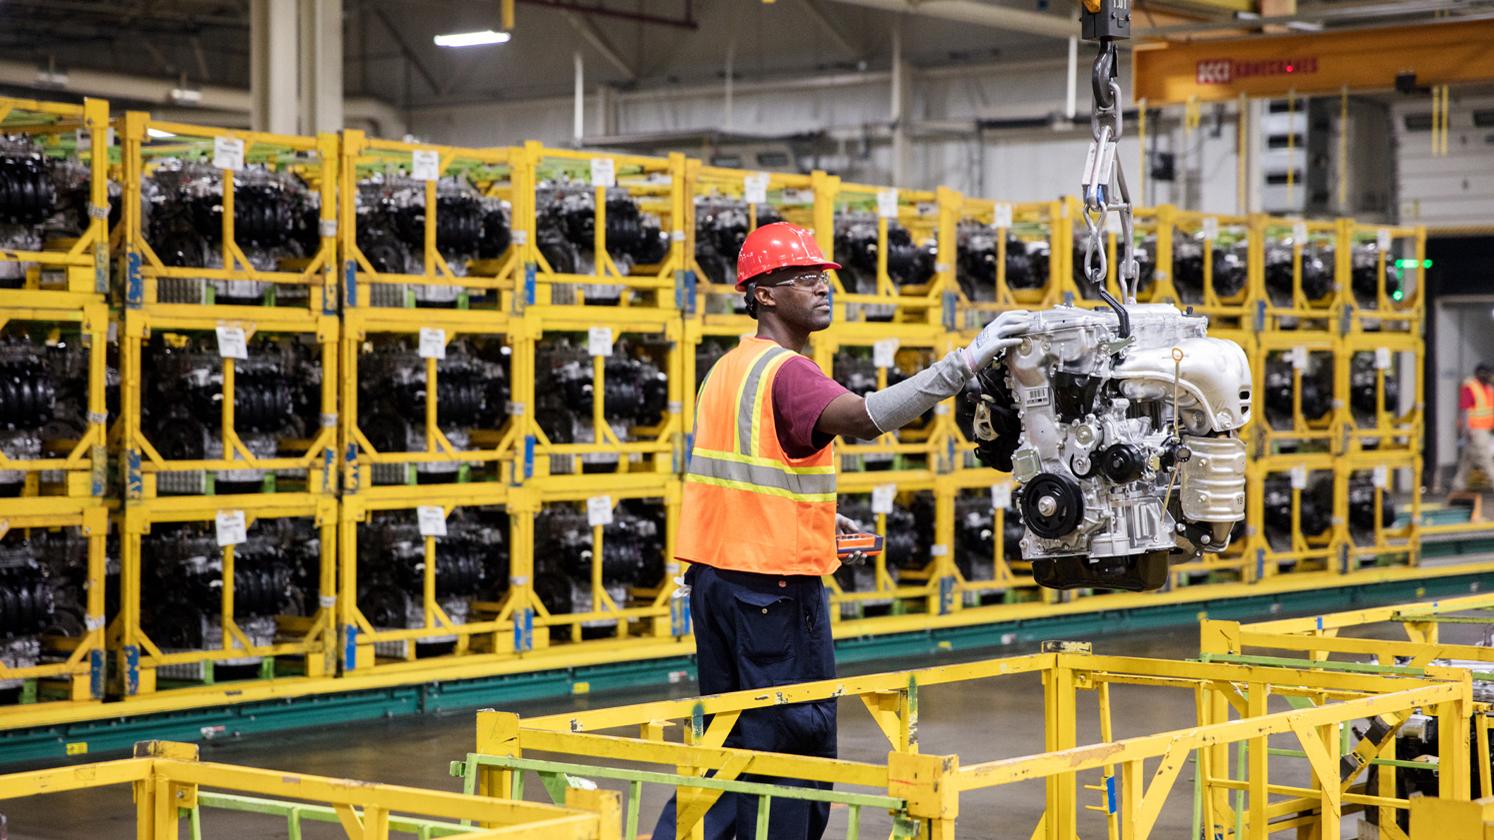 Toyota Motor Manufacturing Alabama builds about 3,000 engines a day at its plant in Huntsville, powering one third of Toyota vehicles produced in North America.